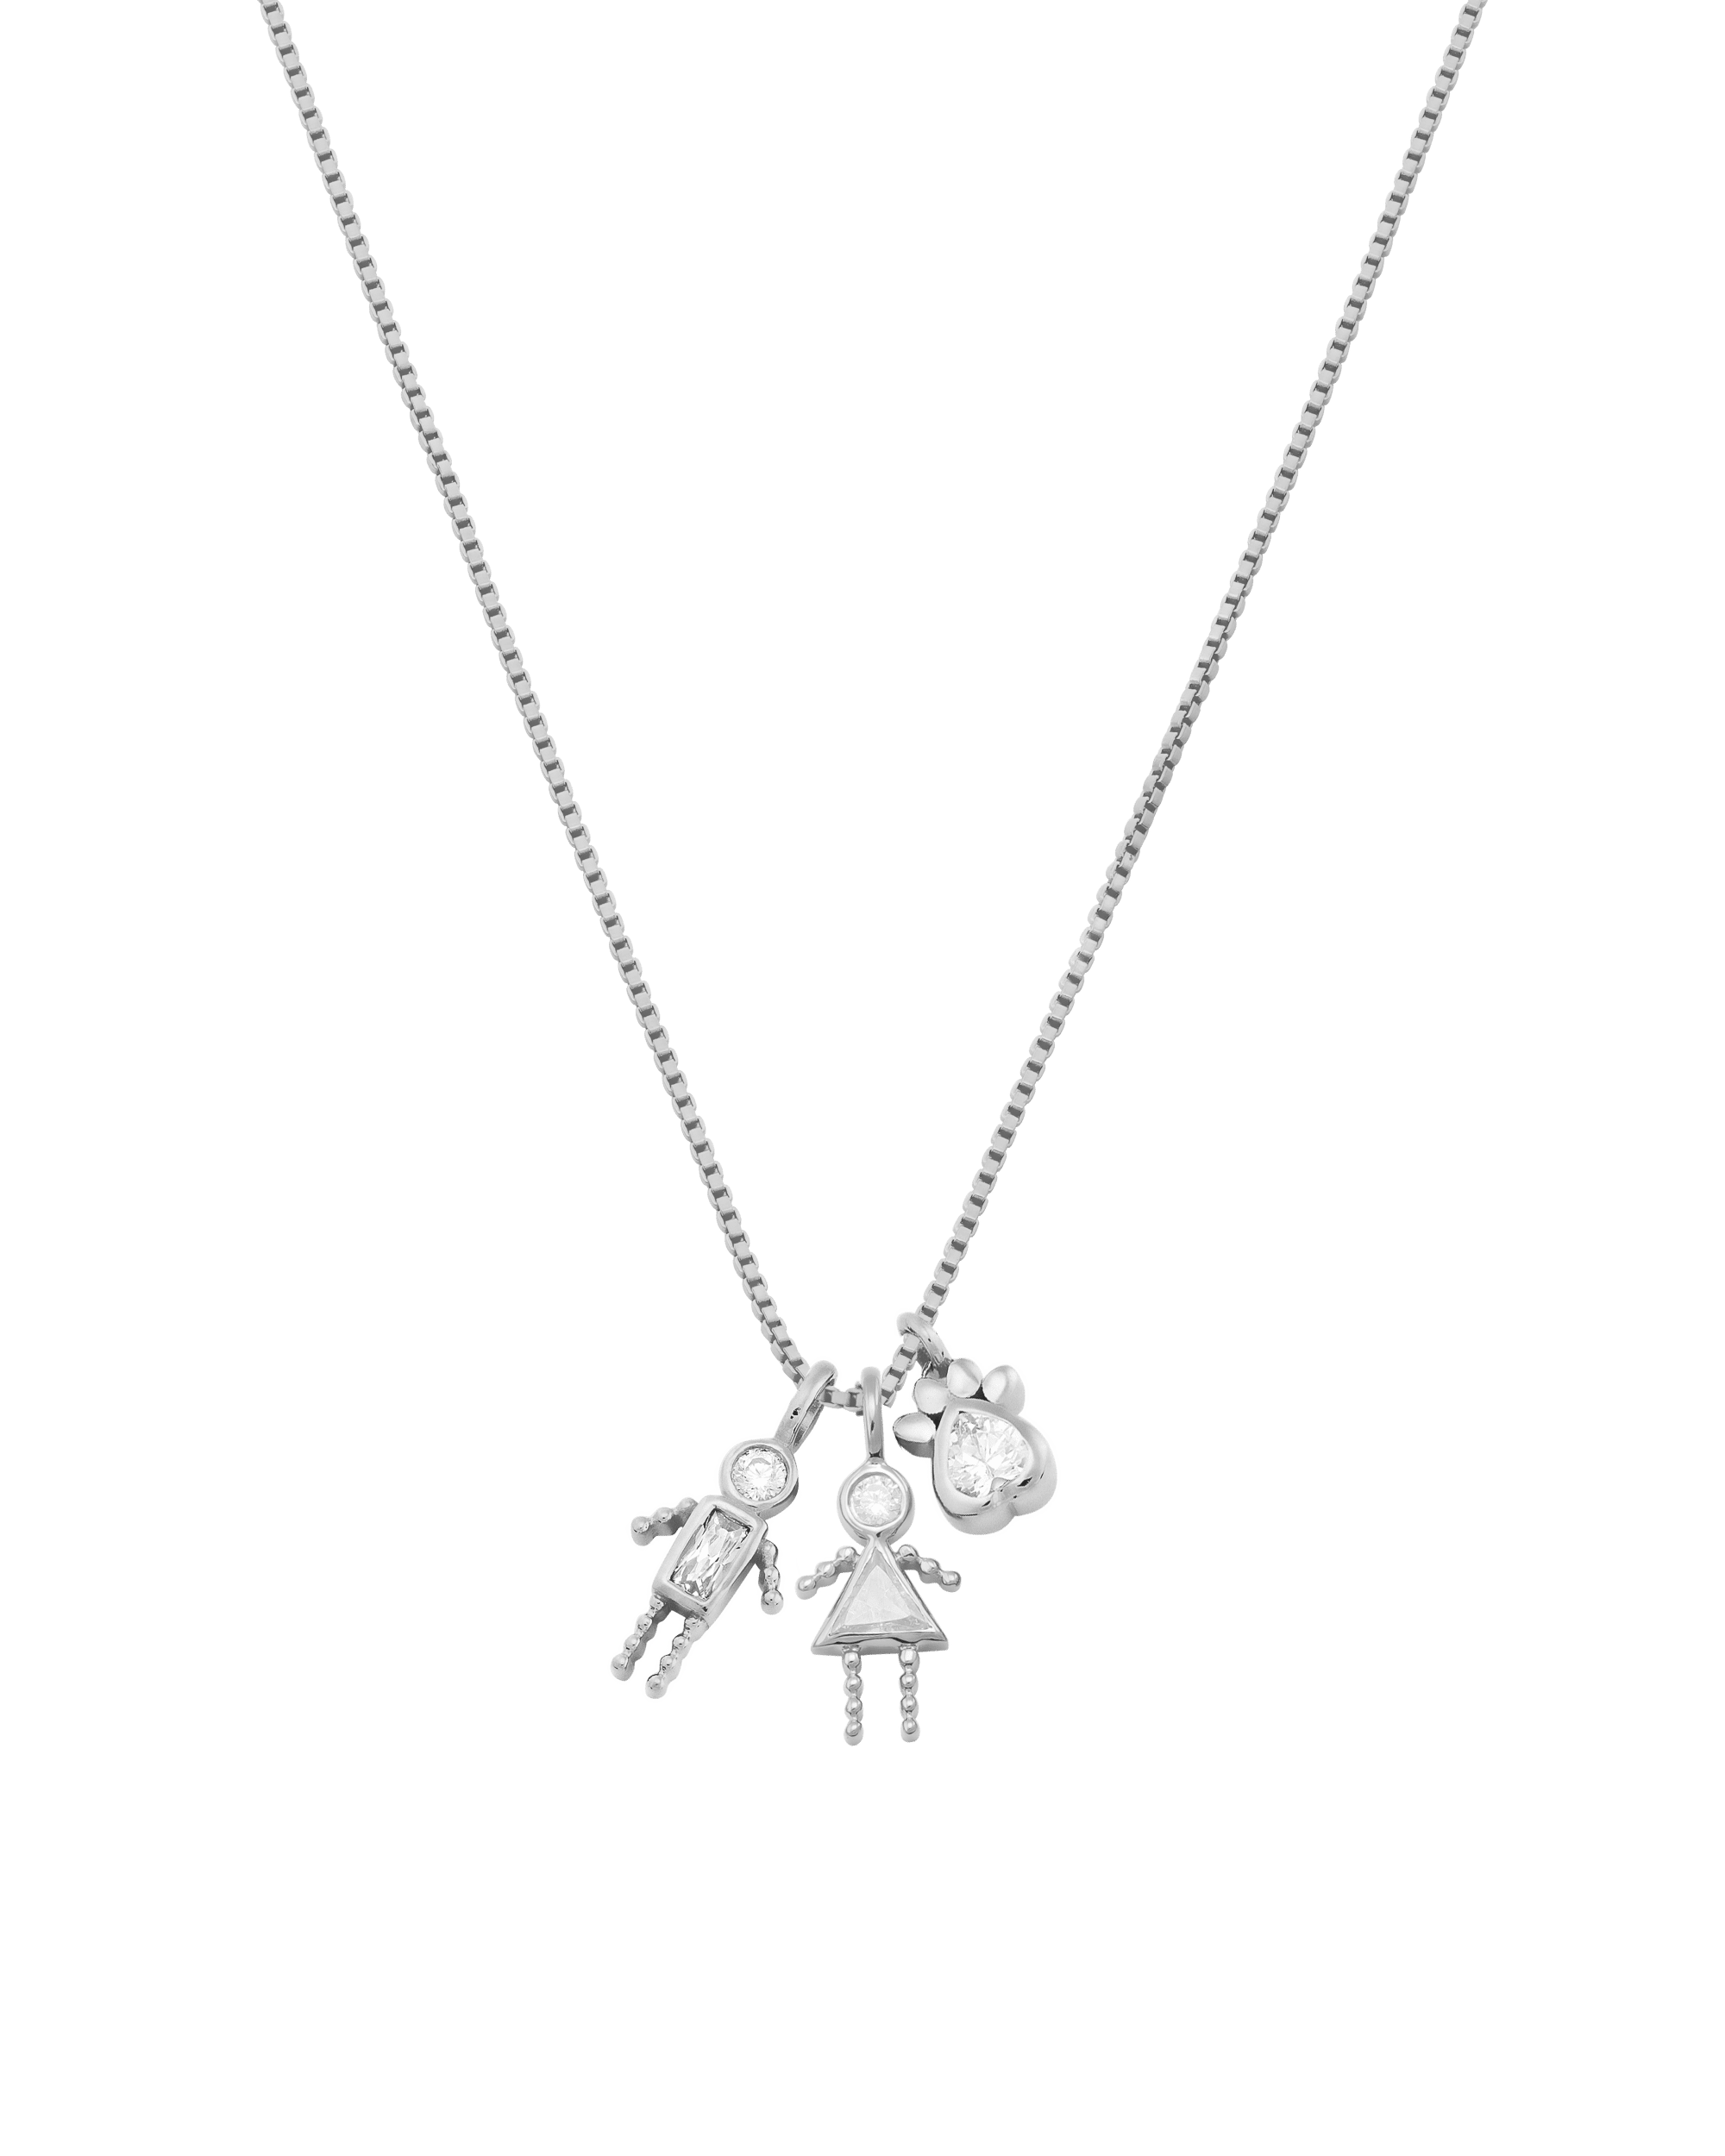 Mini Me Necklace - 925 Sterling Silver Necklaces 925 Silver 